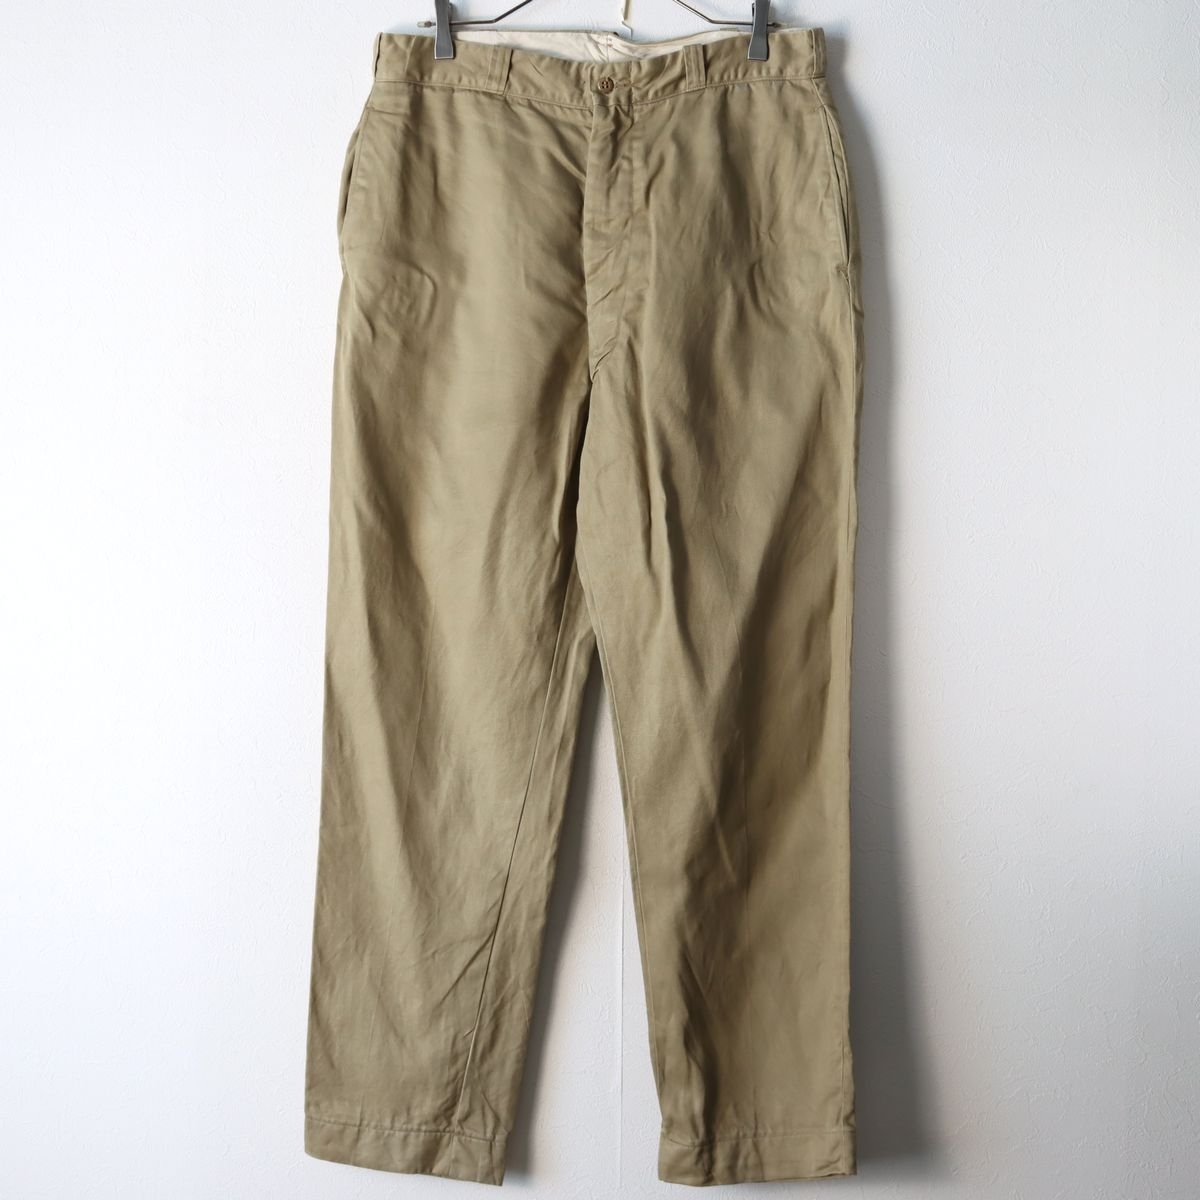 US ARMY America army chino trousers chinos Zip fly 36×33 / old clothes Army military Vintage 